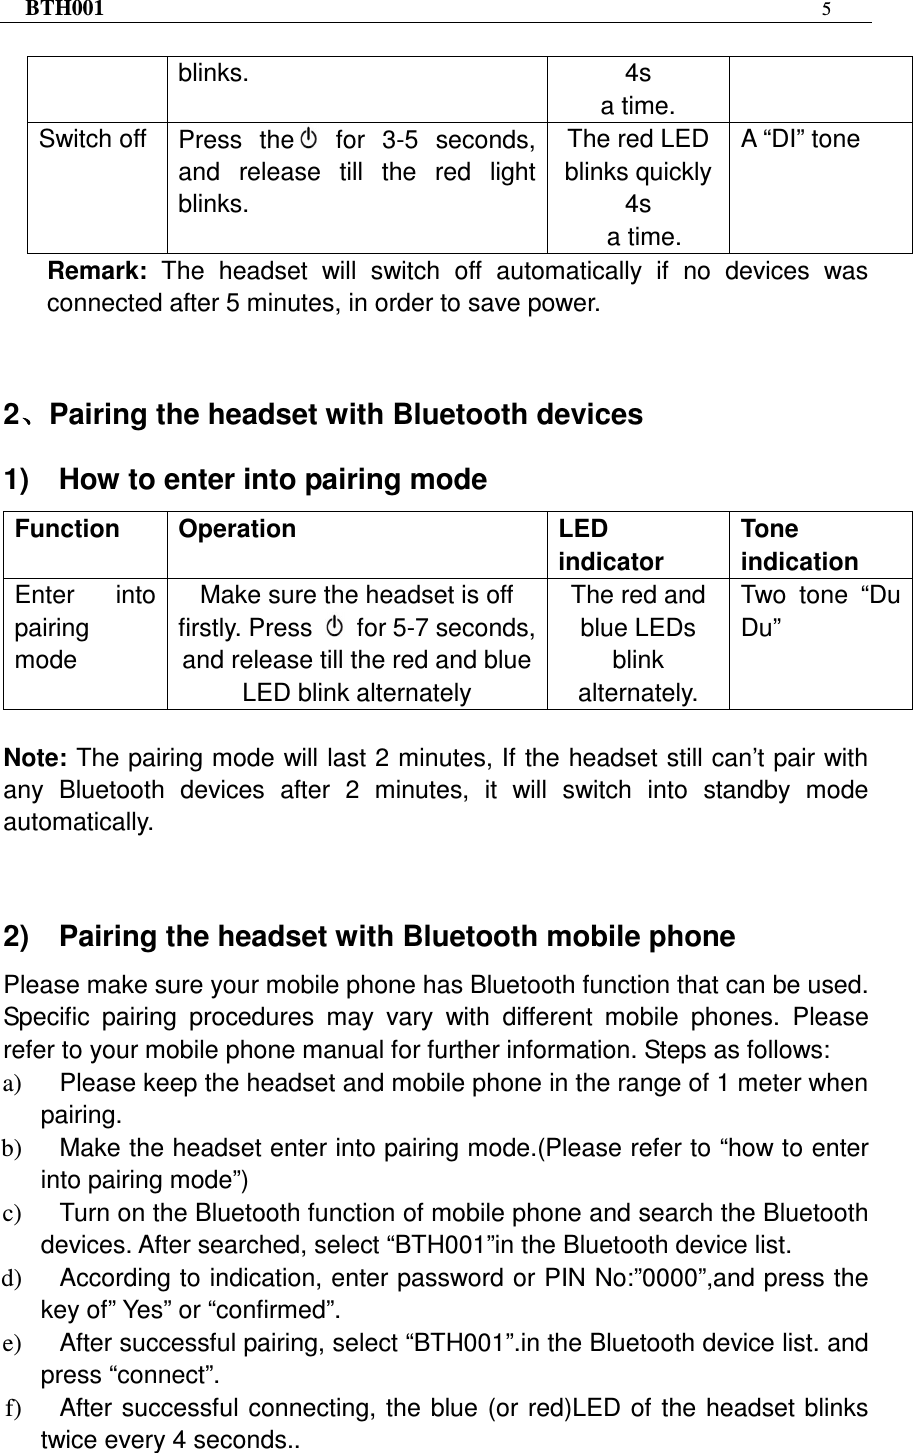 BTH001  5   blinks.  4s   a time. Switch off  Press  the   for  3-5  seconds, and  release  till  the  red  light blinks. The red LED blinks quickly 4s   a time. A “DI” tone Remark:  The  headset  will  switch  off  automatically  if  no  devices  was connected after 5 minutes, in order to save power.   2、、、、Pairing the headset with Bluetooth devices 1)    How to enter into pairing mode Function  Operation  LED indicator   Tone indication Enter  into pairing mode   Make sure the headset is off firstly. Press    for 5-7 seconds, and release till the red and blue LED blink alternately The red and blue LEDs blink alternately. Two  tone  “Du Du”  Note: The pairing mode will last 2 minutes, If the headset still can’t pair with any  Bluetooth  devices  after  2  minutes,  it  will  switch  into  standby  mode automatically.   2)    Pairing the headset with Bluetooth mobile phone Please make sure your mobile phone has Bluetooth function that can be used. Specific  pairing  procedures  may  vary  with  different  mobile  phones.  Please refer to your mobile phone manual for further information. Steps as follows: a)  Please keep the headset and mobile phone in the range of 1 meter when pairing. b)  Make the headset enter into pairing mode.(Please refer to “how to enter into pairing mode”) c)  Turn on the Bluetooth function of mobile phone and search the Bluetooth devices. After searched, select “BTH001”in the Bluetooth device list. d)  According to indication, enter password or PIN No:”0000”,and press the key of” Yes” or “confirmed”. e)  After successful pairing, select “BTH001”.in the Bluetooth device list. and press “connect”. f)  After successful connecting,  the  blue  (or red)LED of  the  headset blinks twice every 4 seconds..  